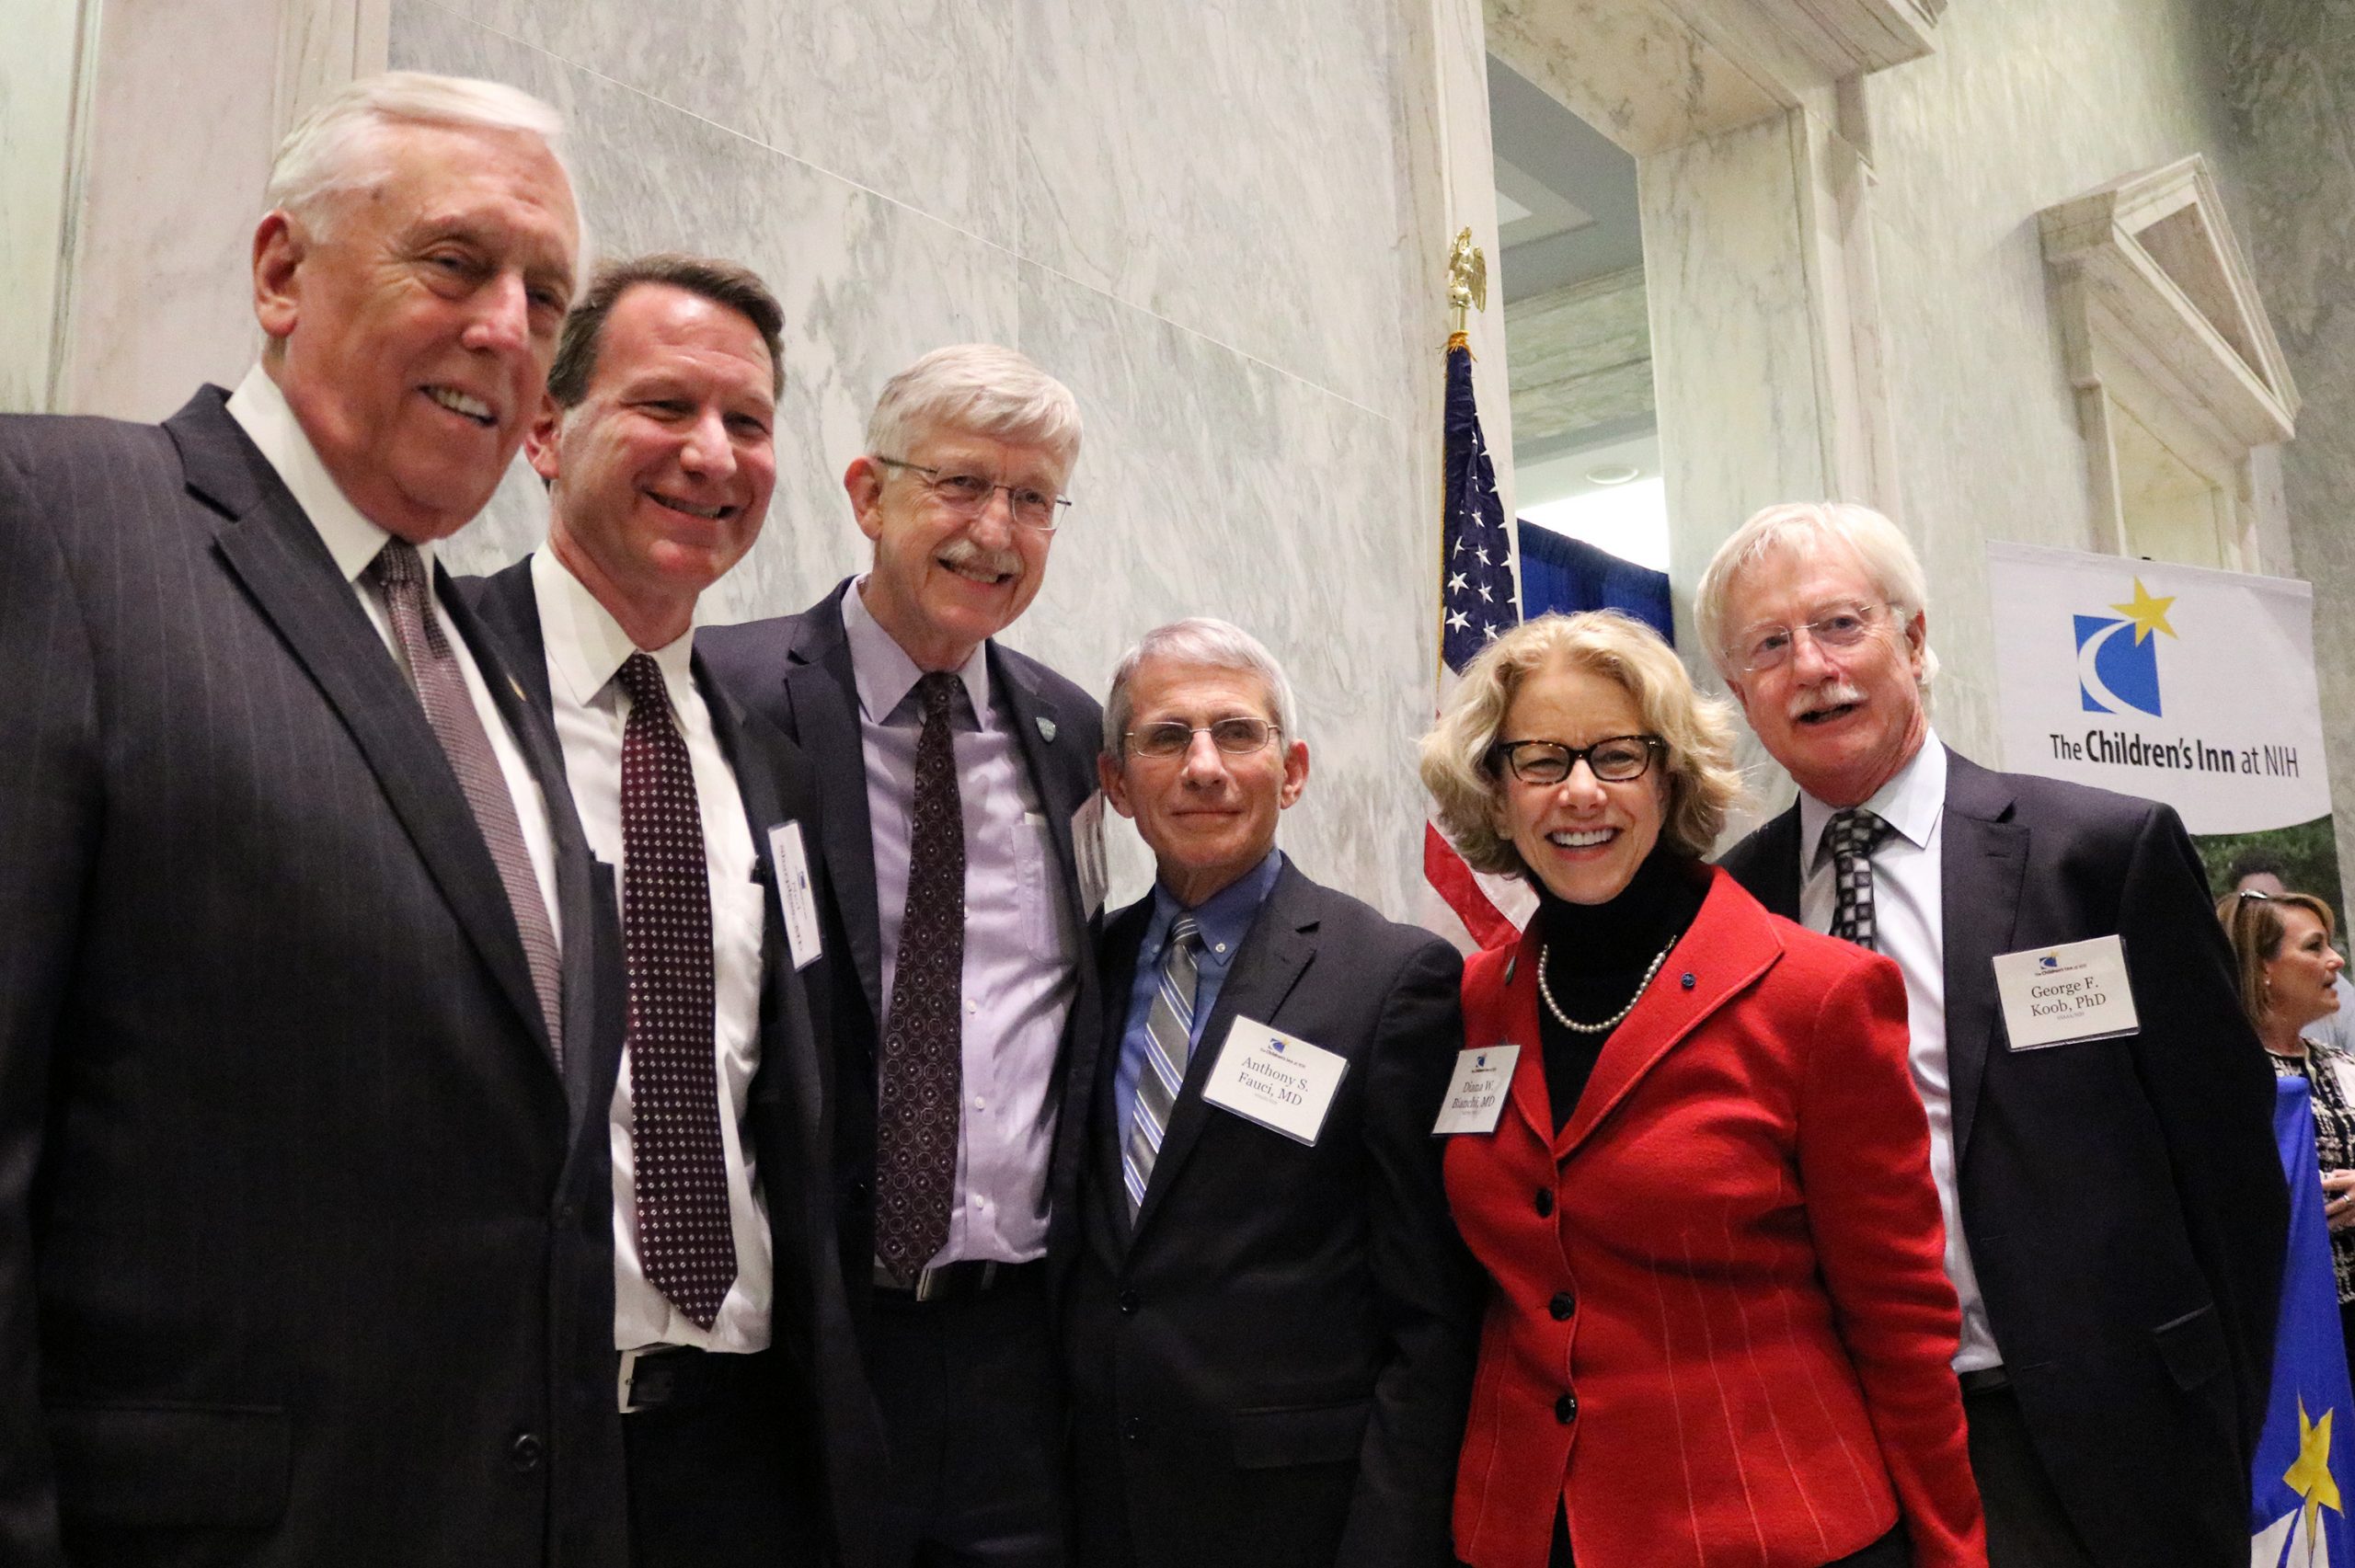 From left to right: Rep. Steny Hoyer, Sharpless, Dr. Collins, Dr. Fauci, Dr. Bianchi, George Koob